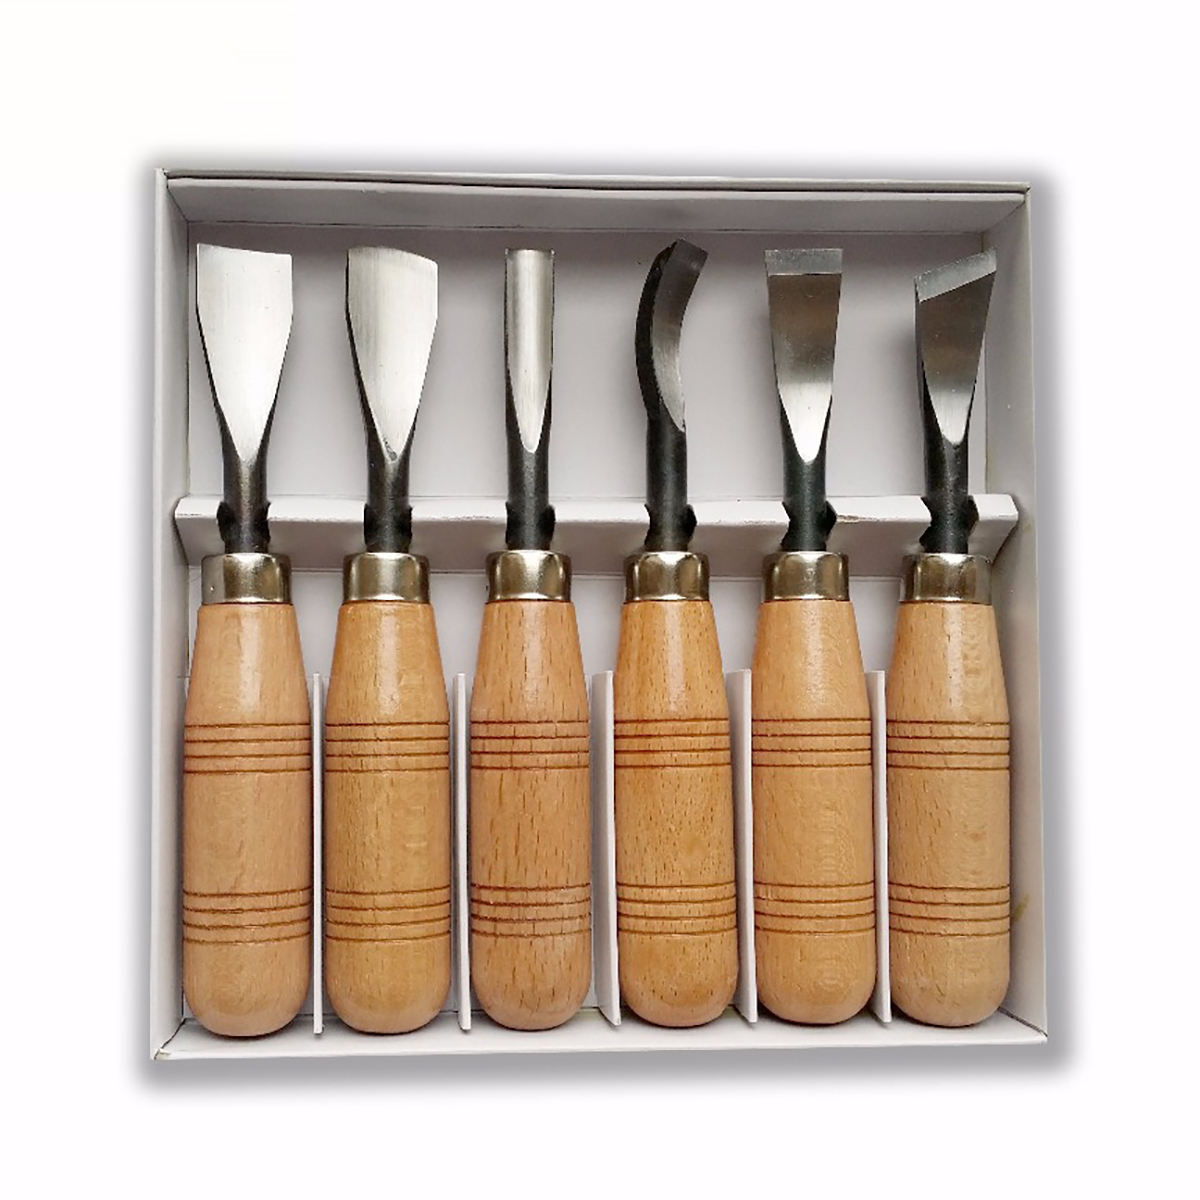 

6pcs Professional Wood Carving Tools Kit Woodworking Craft Chisel Hand